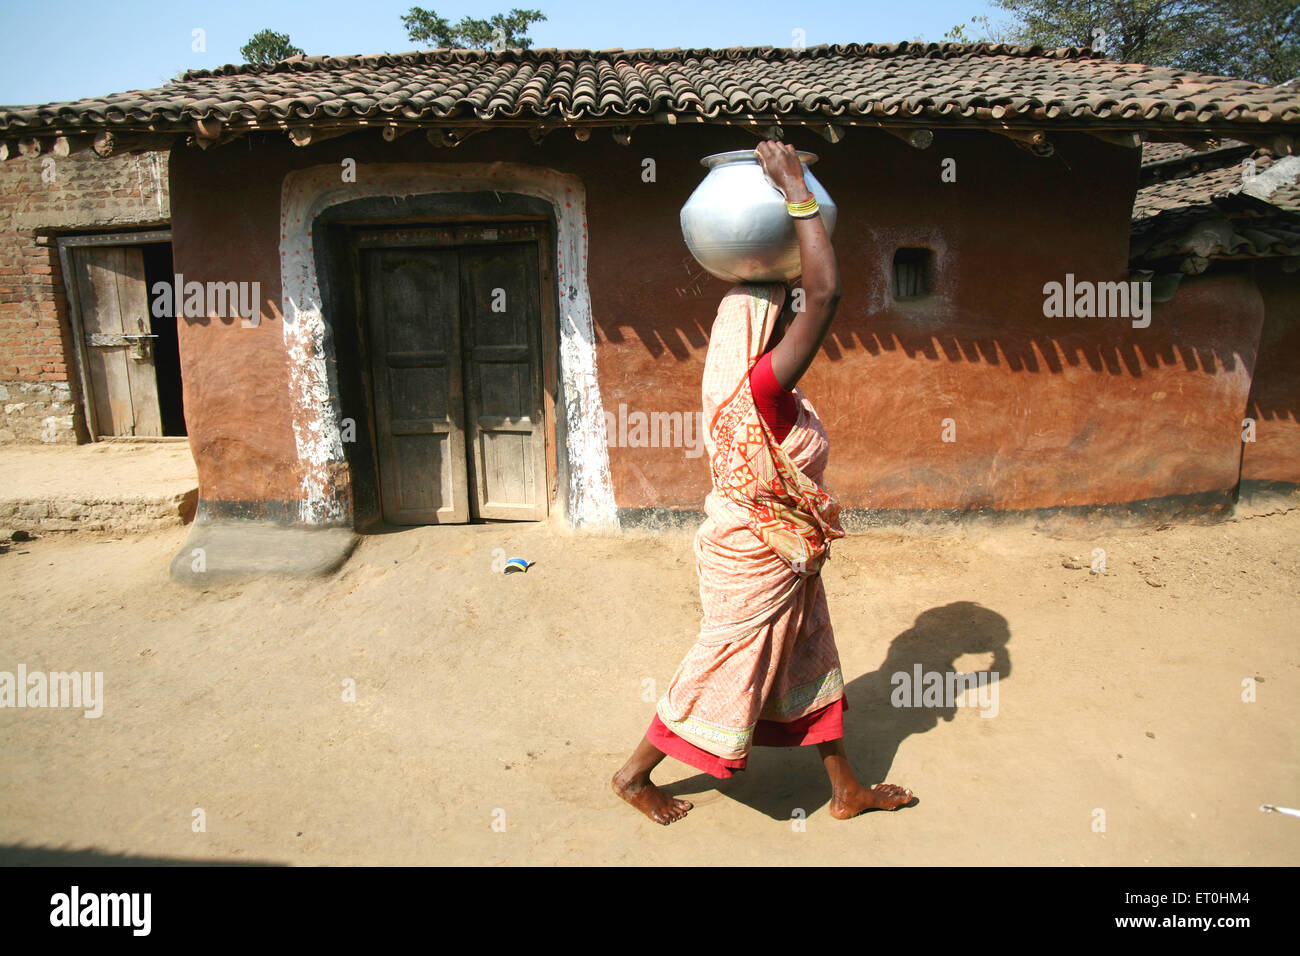 Indian rural woman carrying water pot on head in village road, Ranchi, Jharkhand, India, Indian life Stock Photo